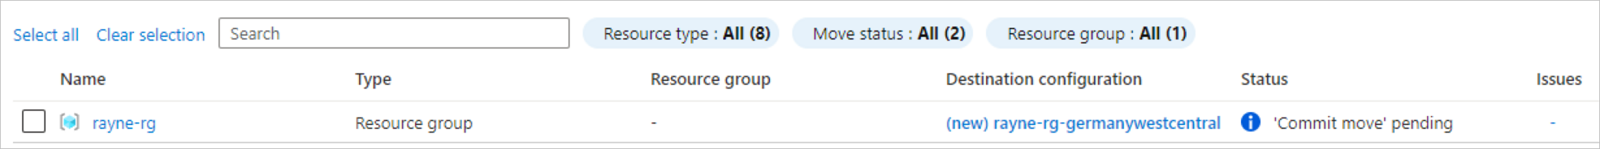 Screenshot of the 'Move resources' pane showing the resource group status changed to 'Commit move pending'.